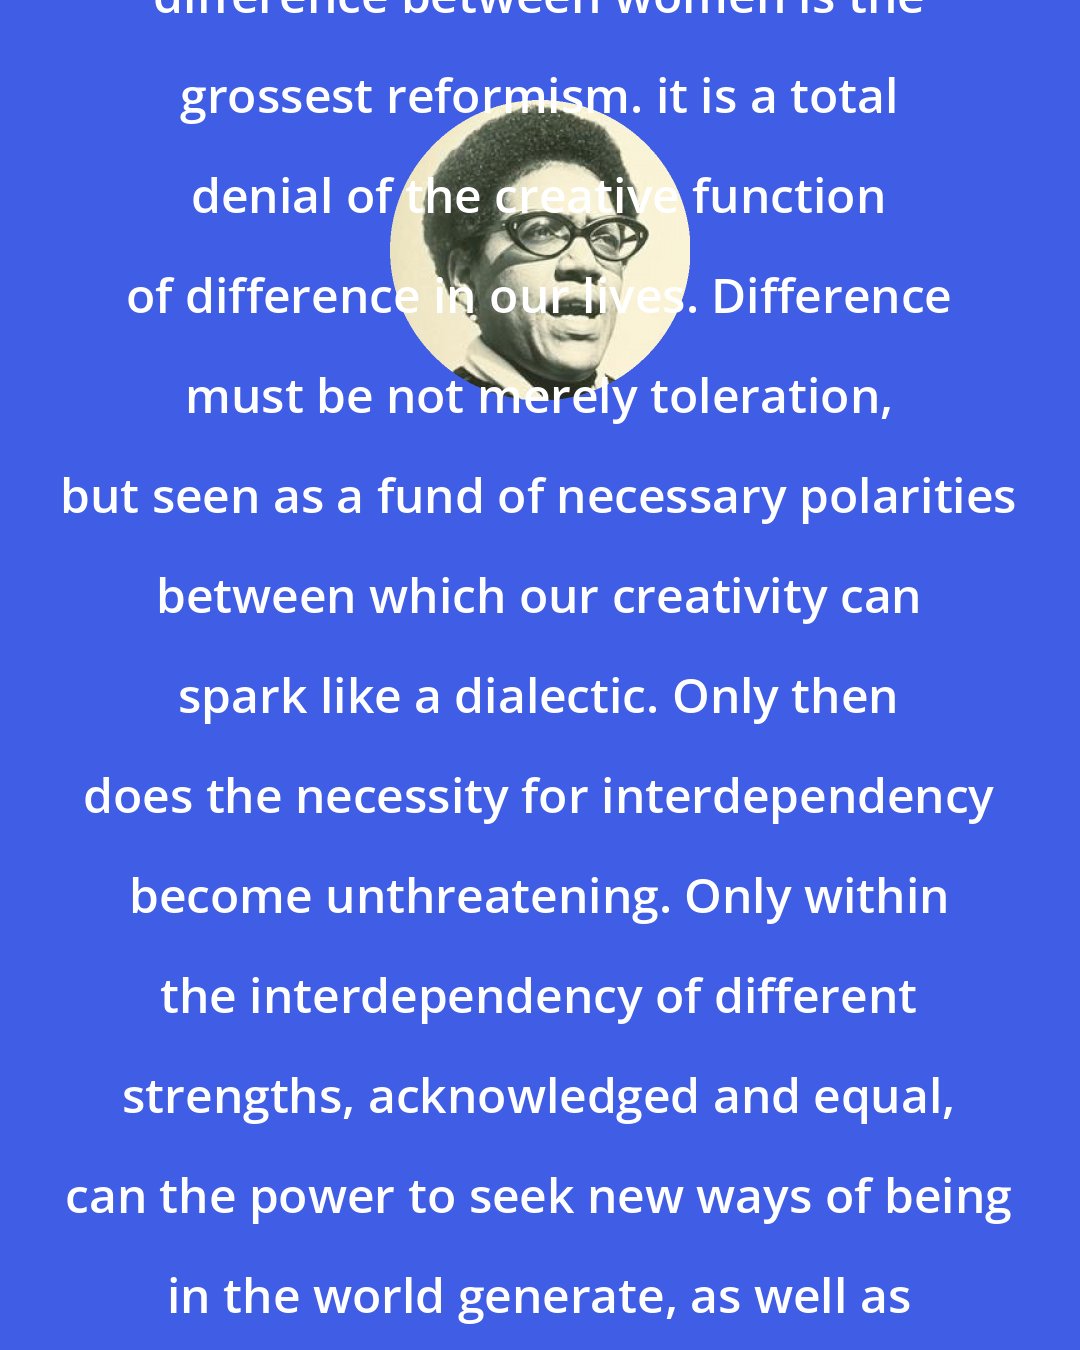 Audre Lorde: Advocating the mere tolerance of difference between women is the grossest reformism. it is a total denial of the creative function of difference in our lives. Difference must be not merely toleration, but seen as a fund of necessary polarities between which our creativity can spark like a dialectic. Only then does the necessity for interdependency become unthreatening. Only within the interdependency of different strengths, acknowledged and equal, can the power to seek new ways of being in the world generate, as well as the courage and sustenance to act where there are no charters